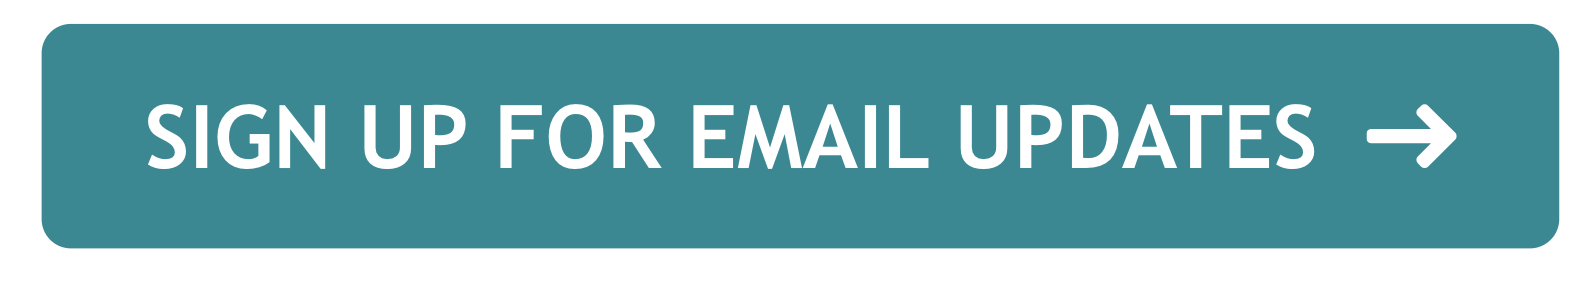 Sign up for email updates